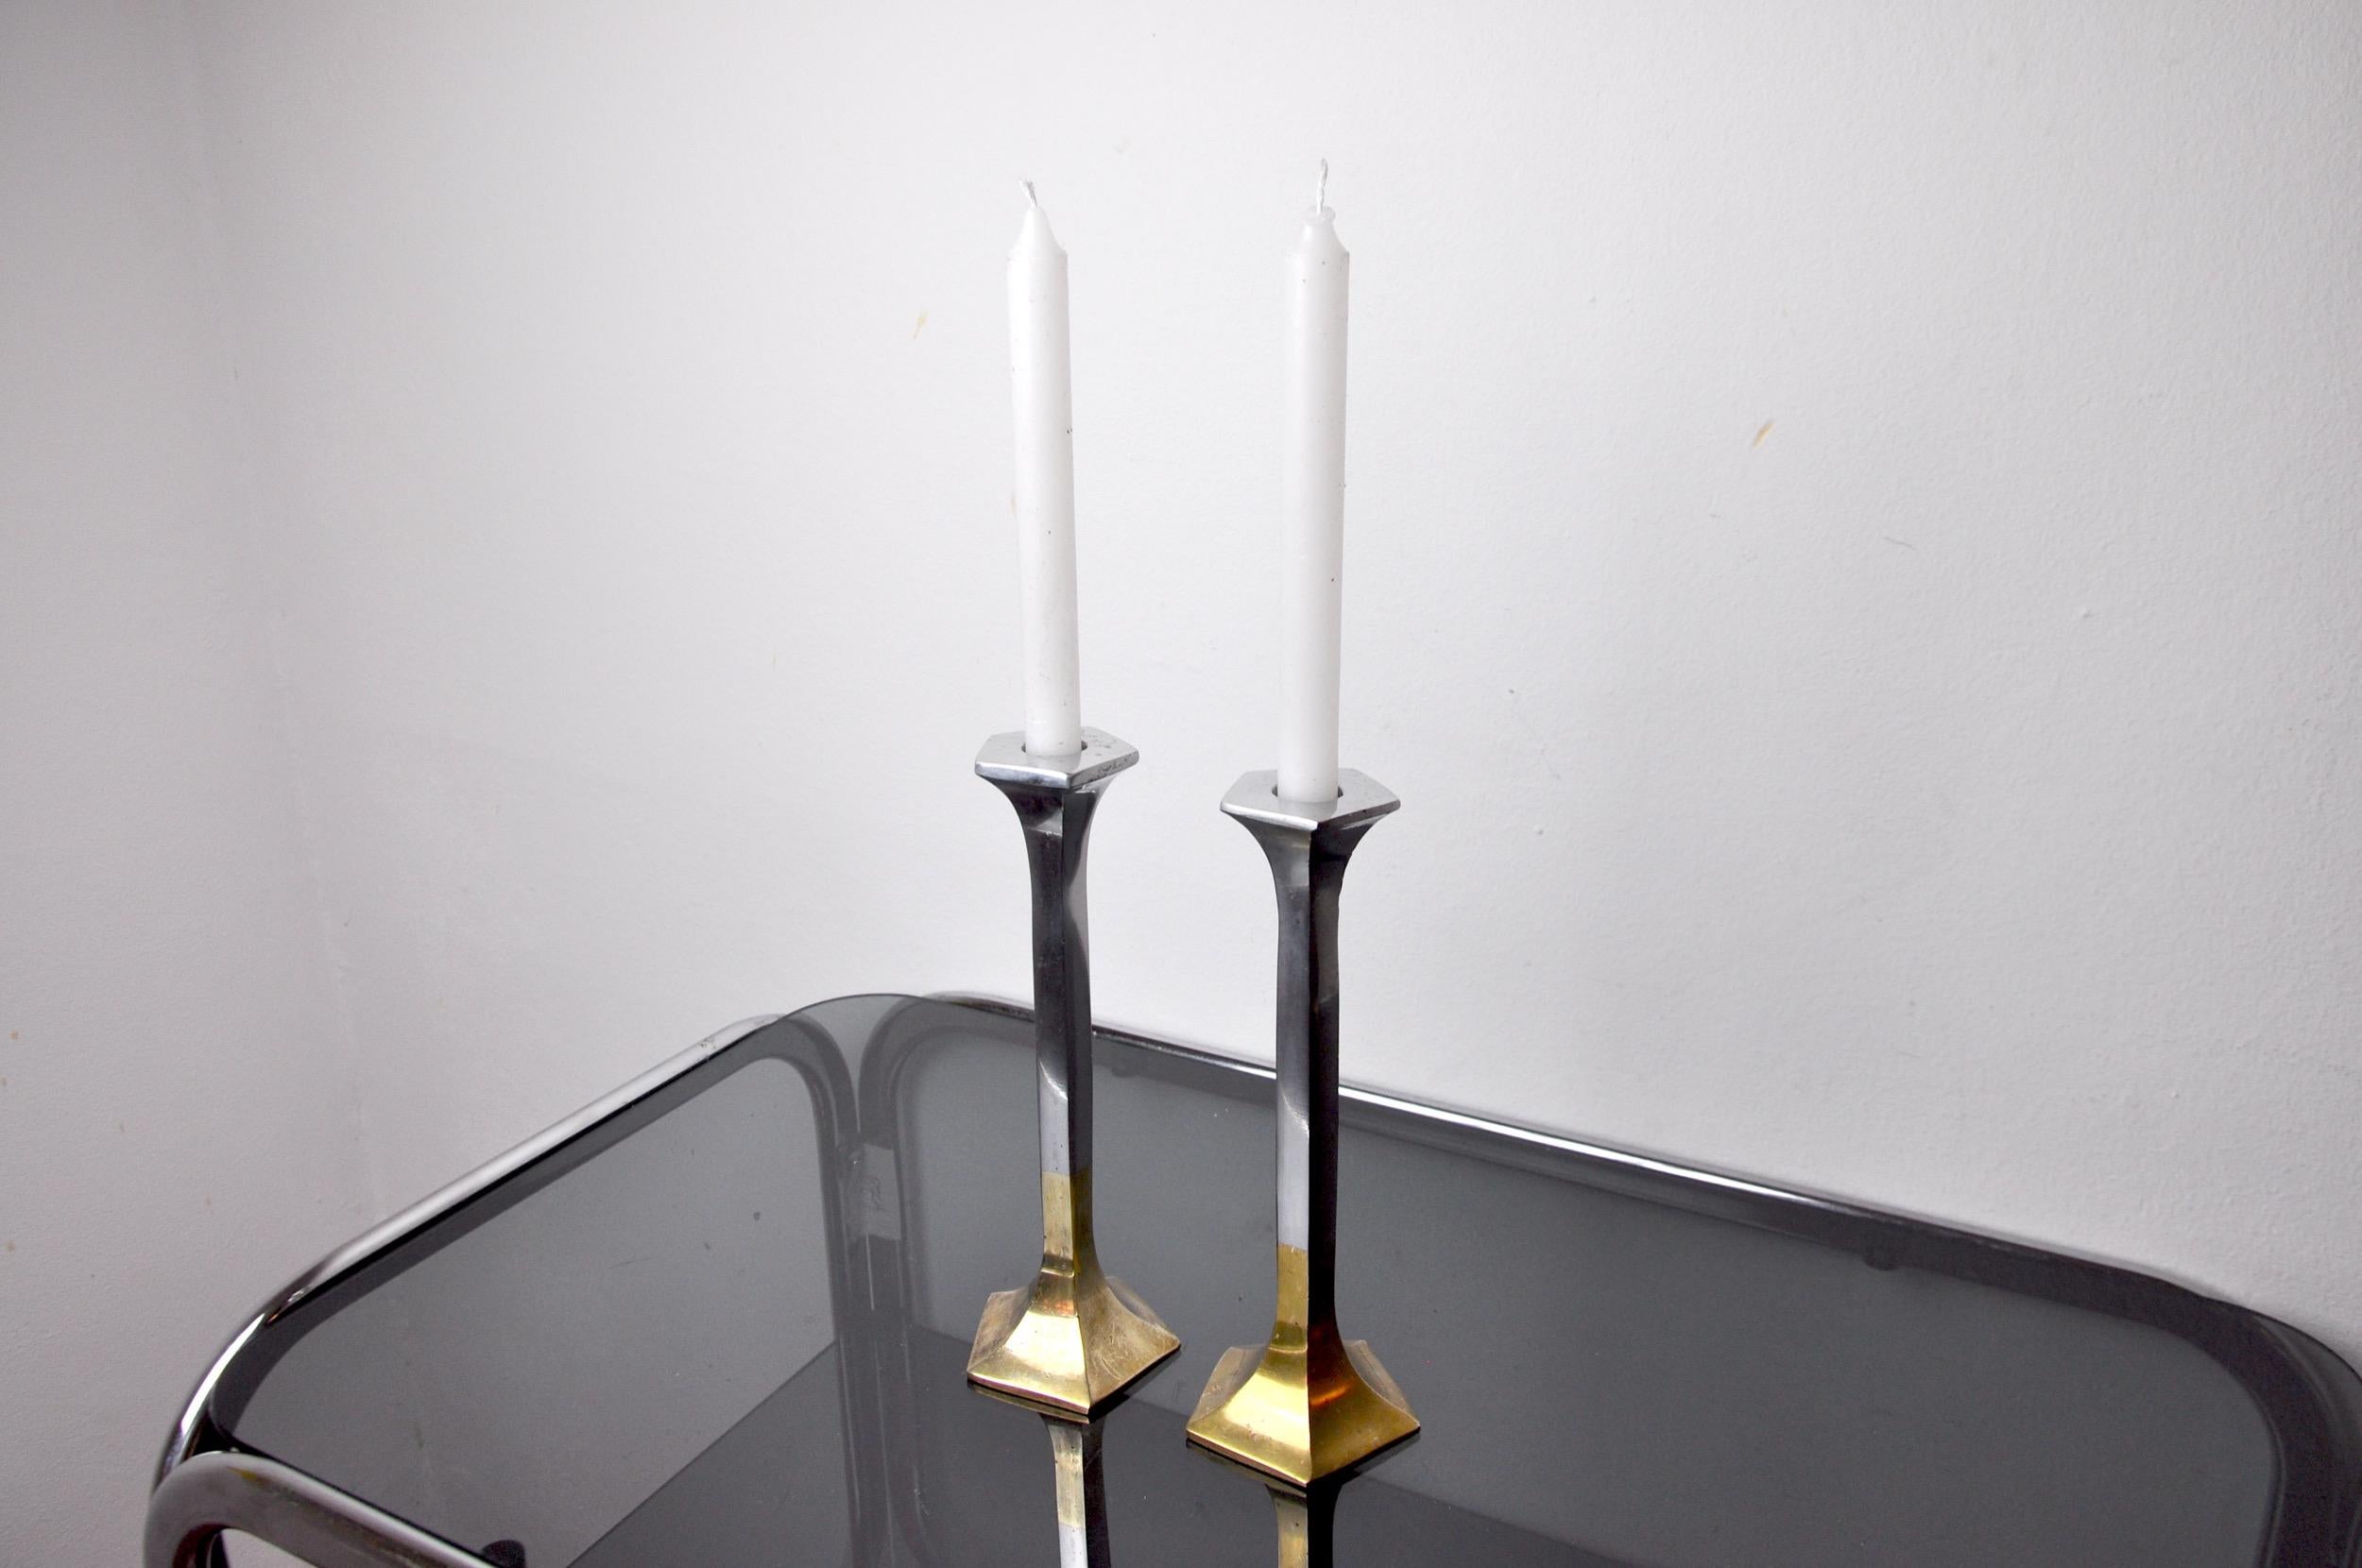 Rare and superb pair of Brutalist candlesticks designed and made by the artist David Marshall in the 80s, spain.

Structure in brass and aluminum.

Design objects that will decorate your interior perfectly.

Ref: 944.